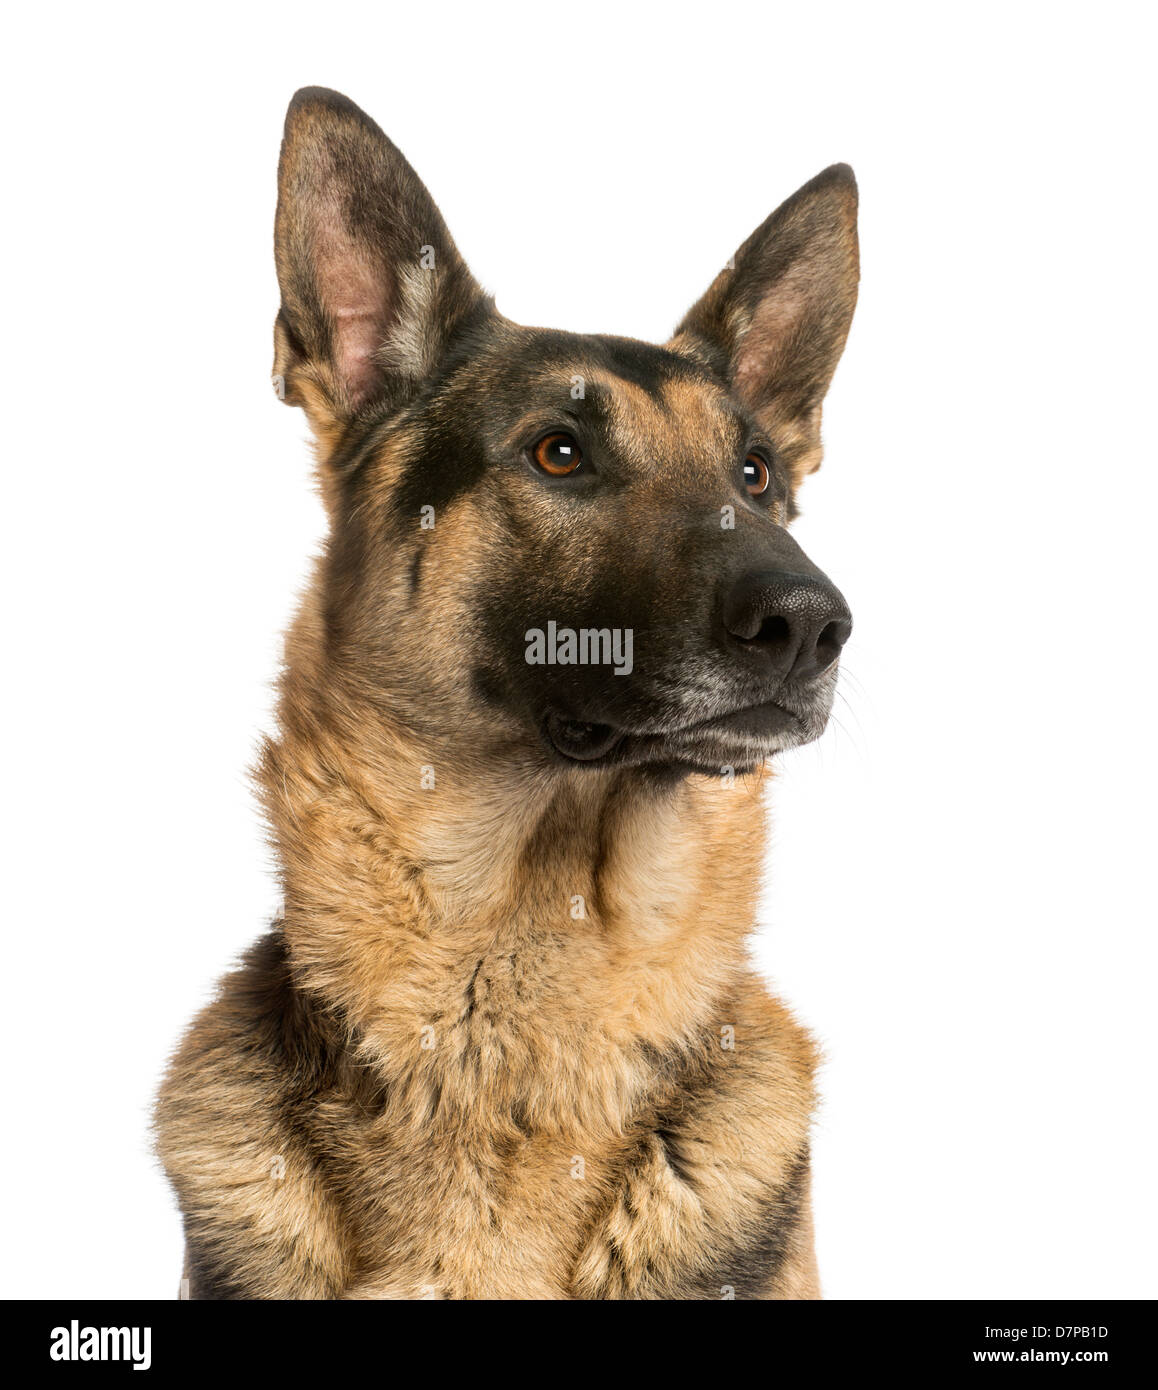 Close-up of a German shepherd looking away, 4.5 years old, against white background Stock Photo